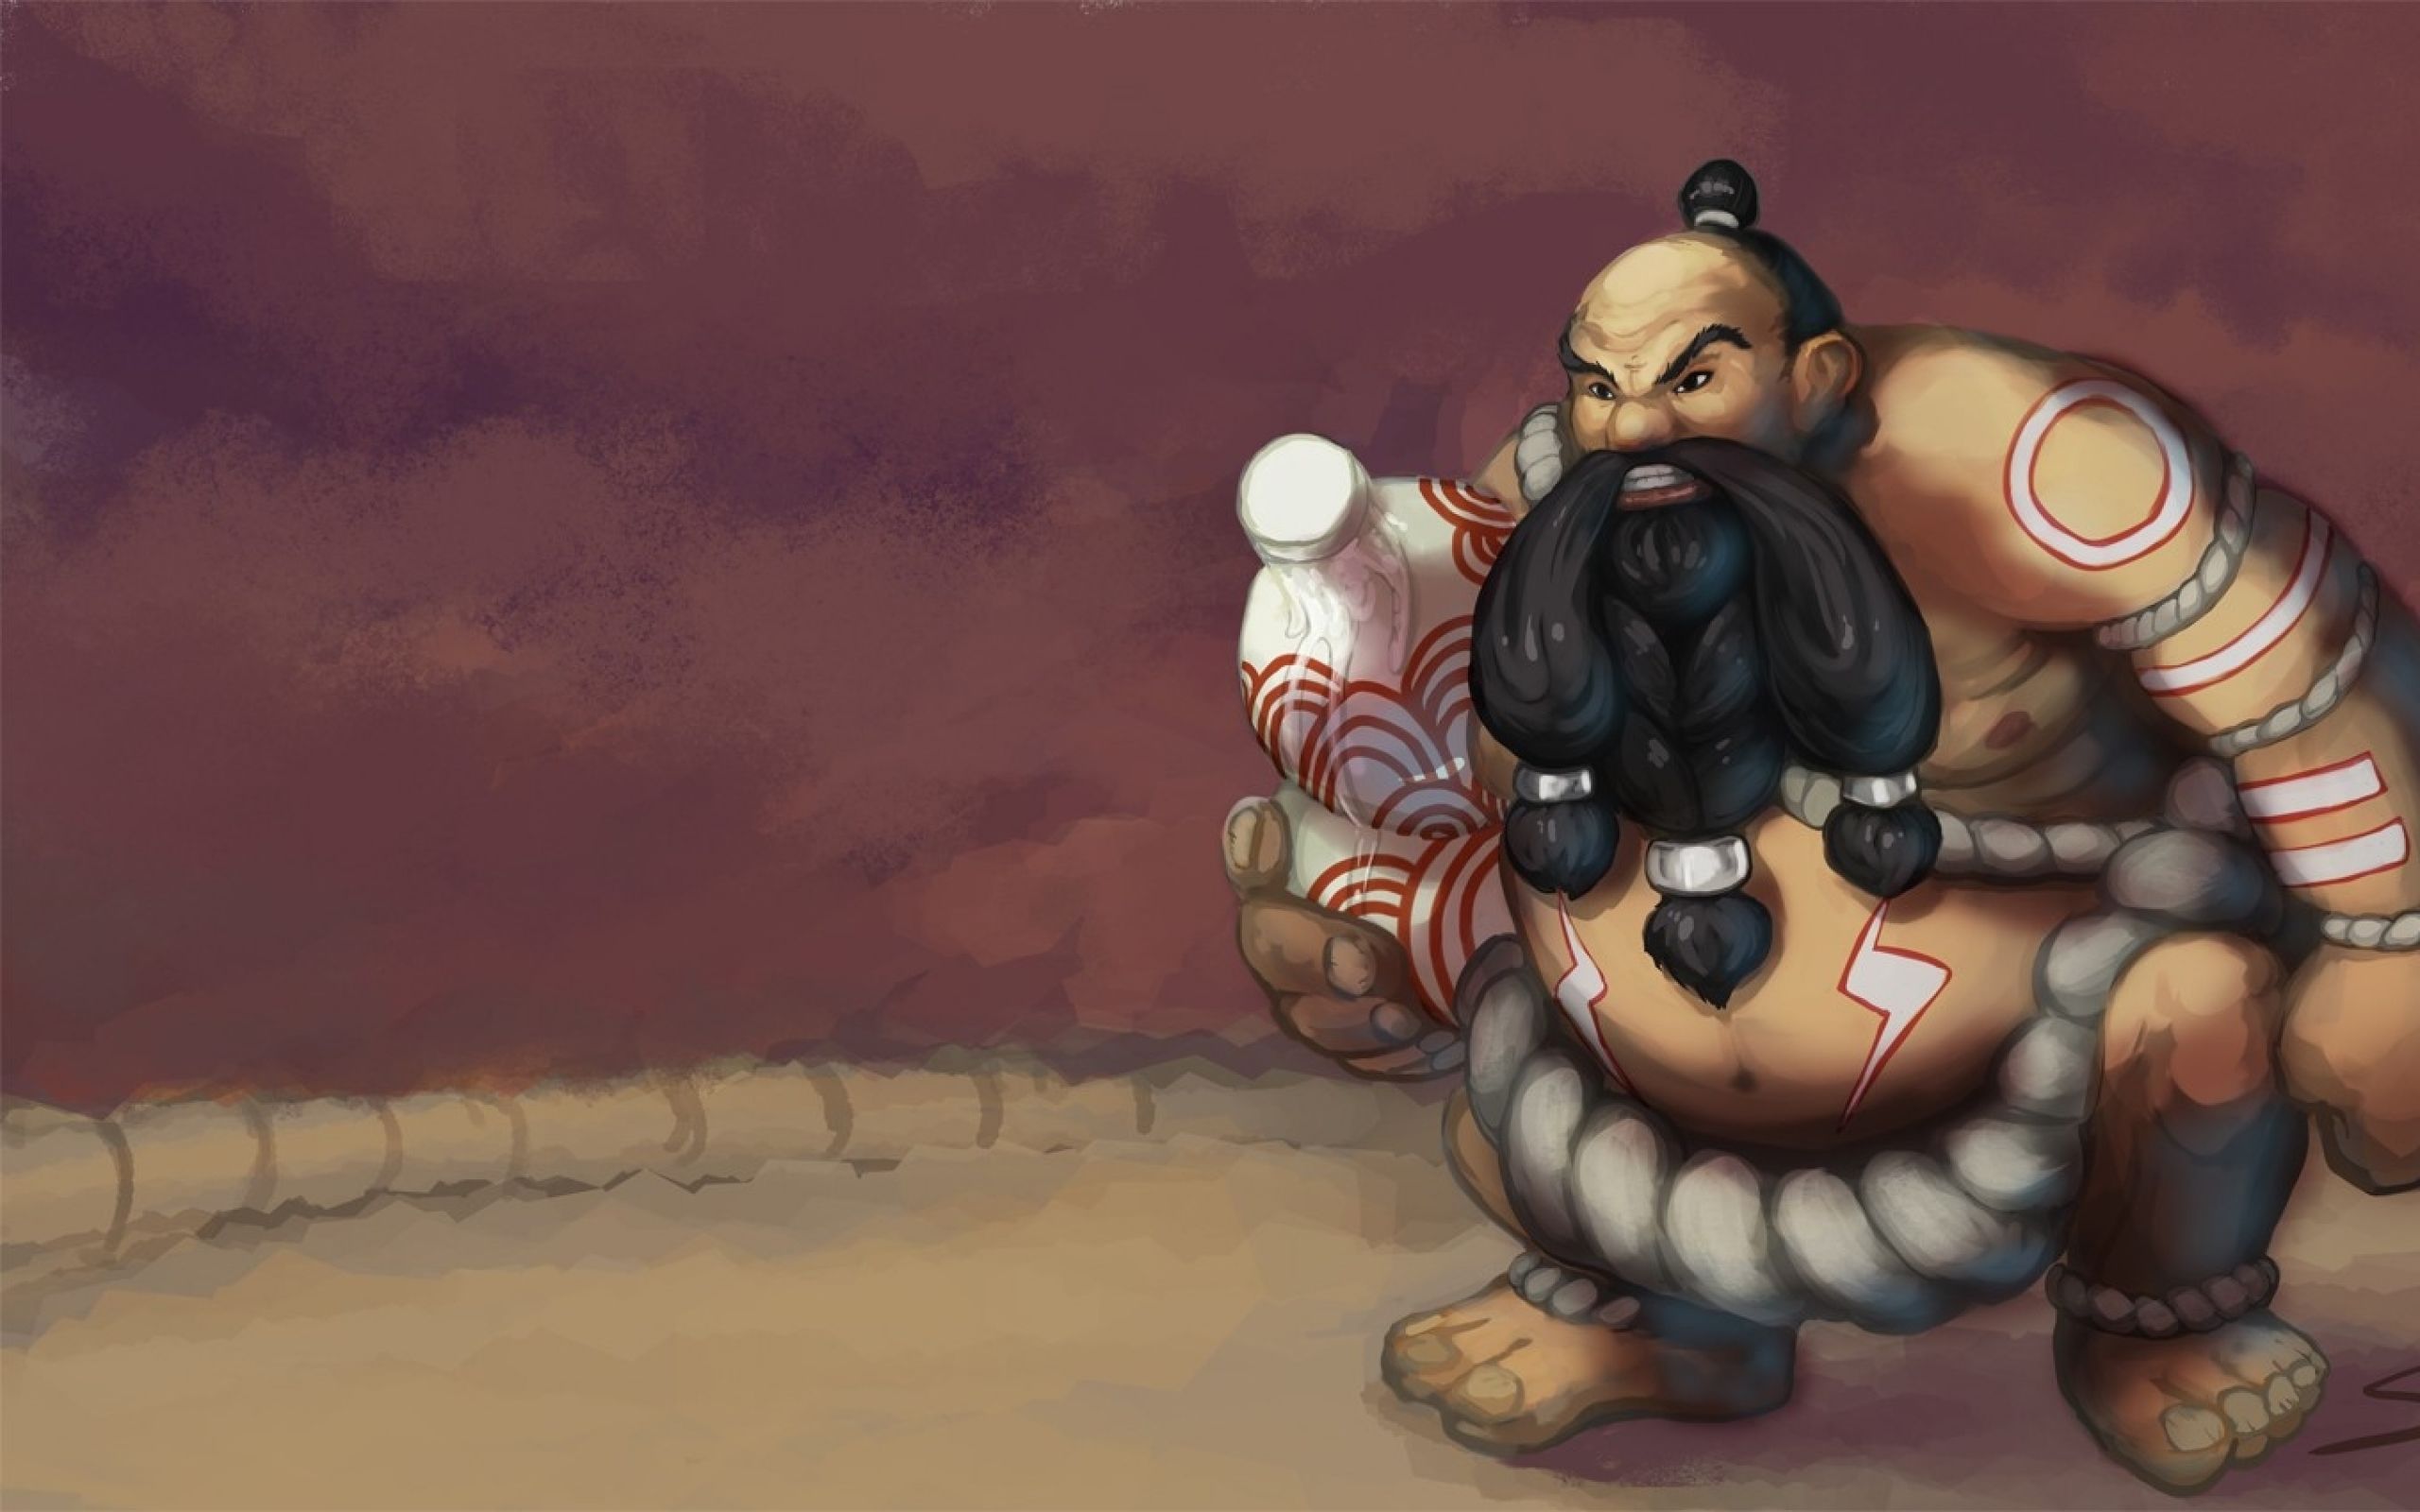 gragas wallpapers wallpaper cave on gragas wallpapers